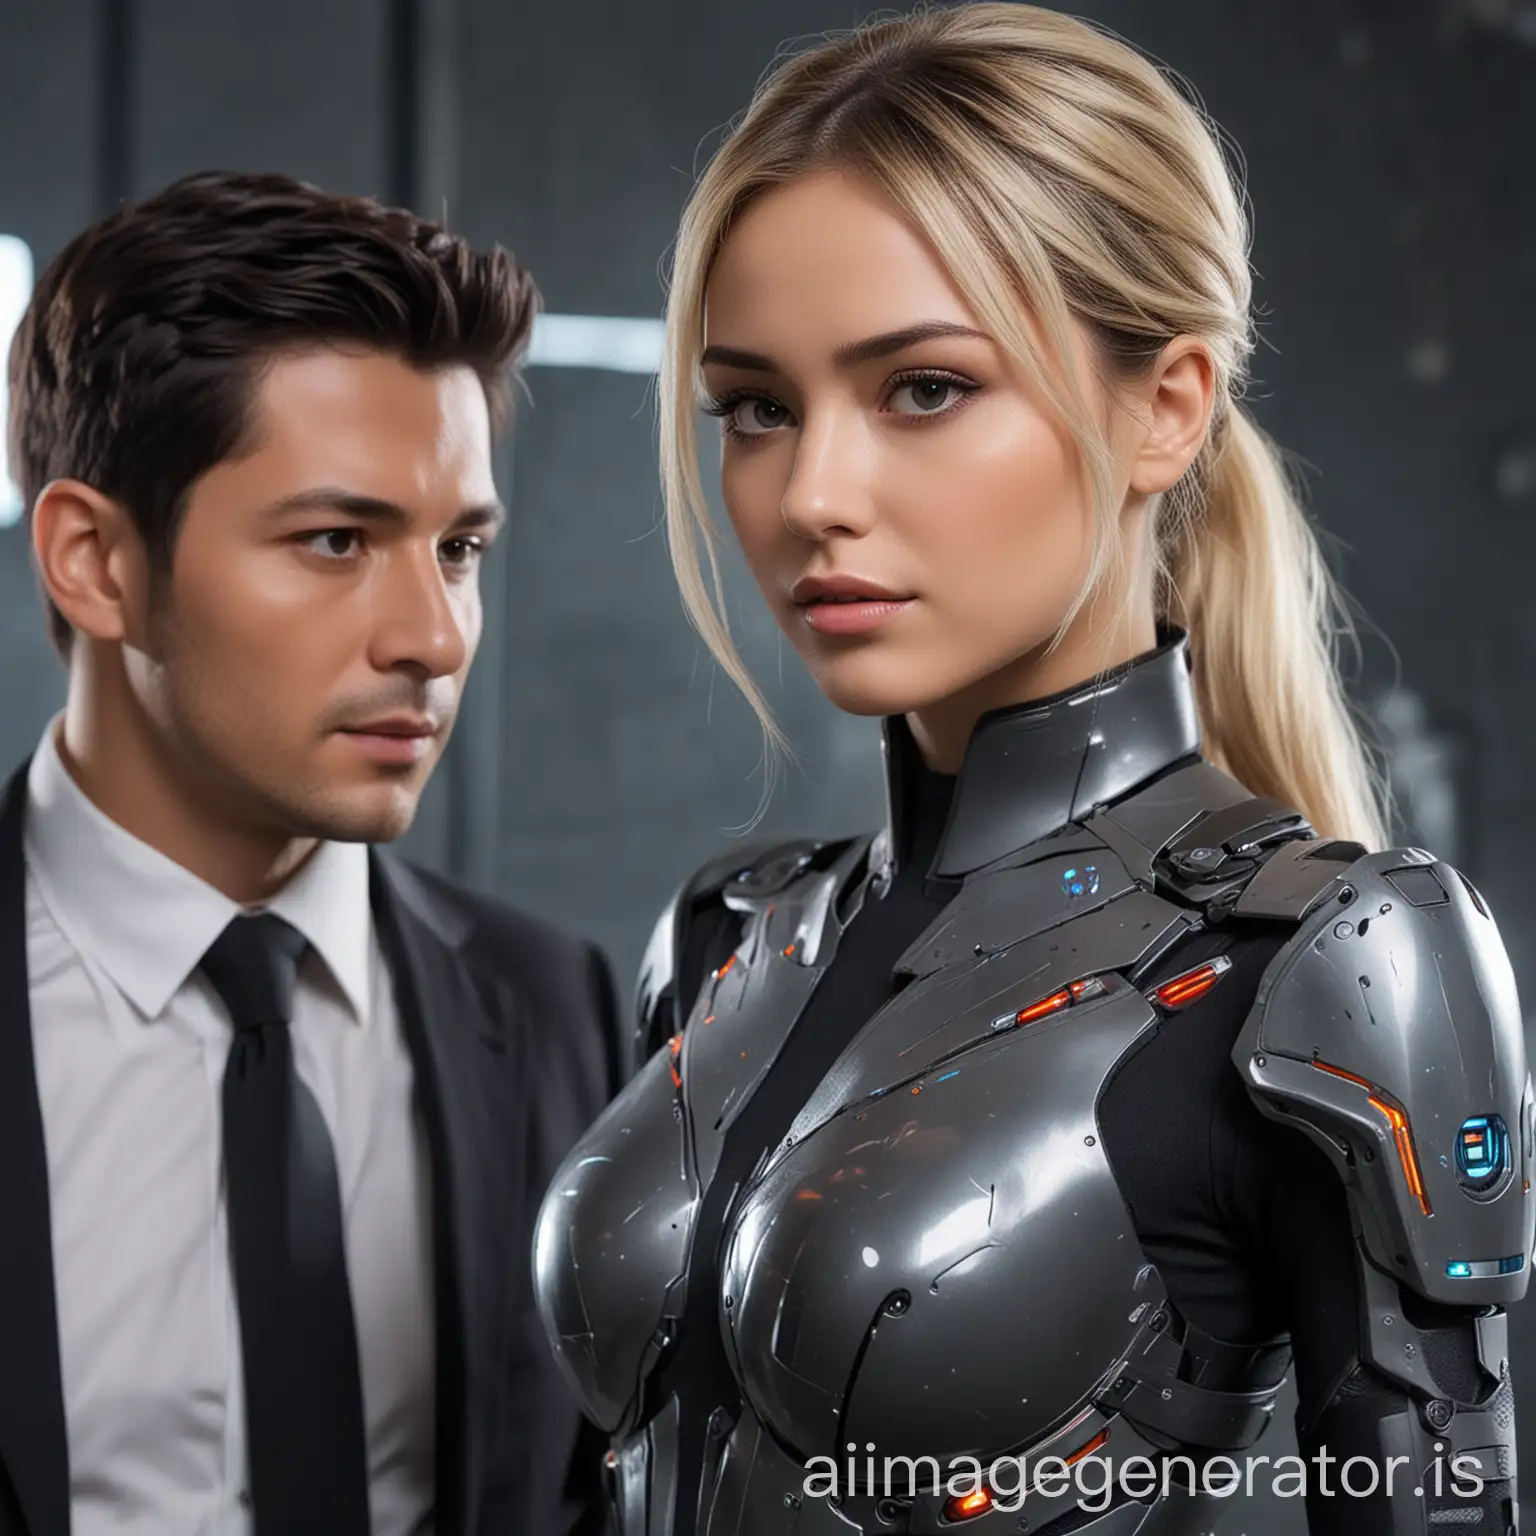 Futuristic-Strong-Agent-with-Beautiful-Female-Assistant